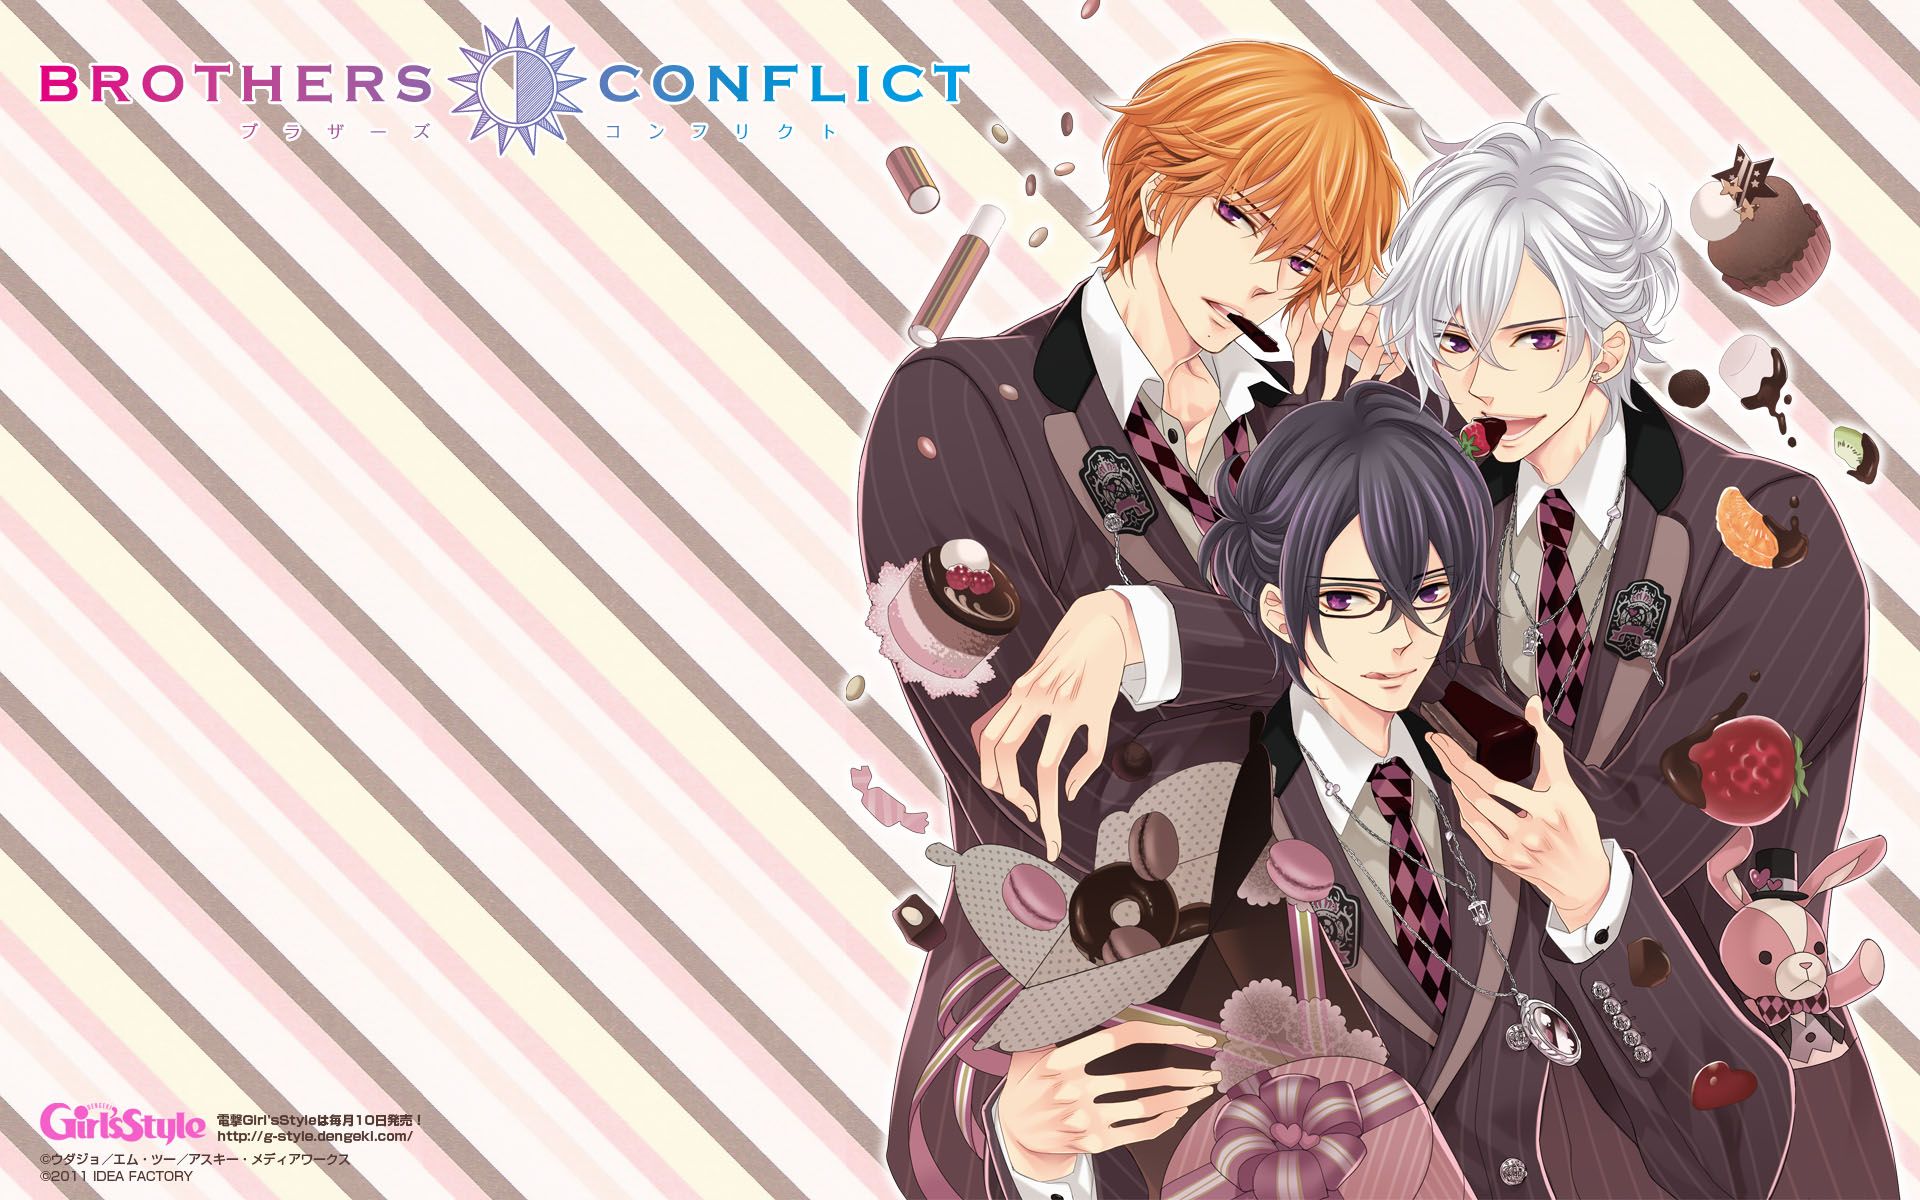 Brothers Conflict Iori Yagami Anime Anime manga computer Wallpaper  human png  PNGWing